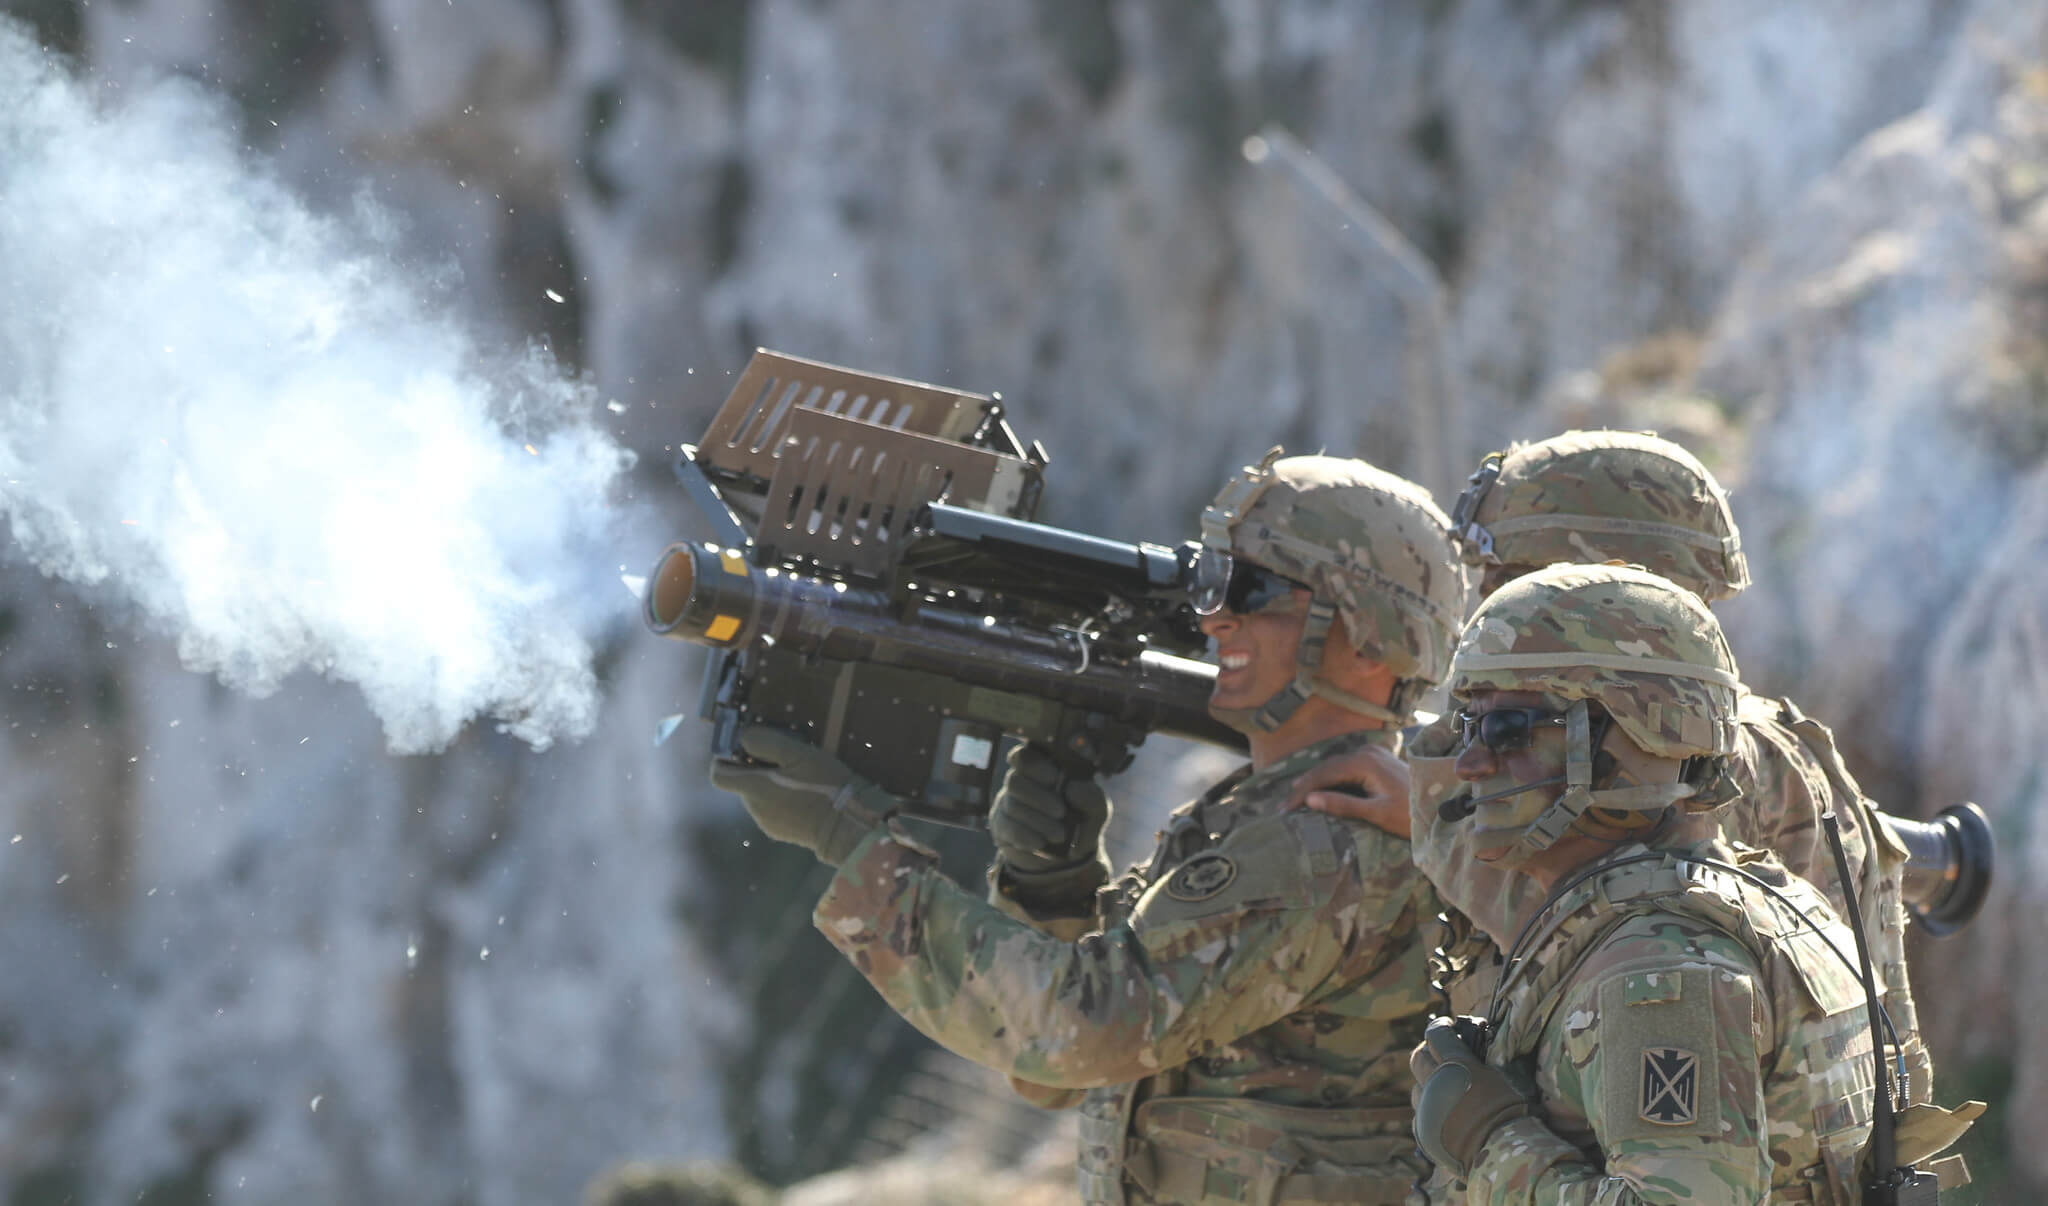 Tack - An American soldier fires a Stinger missile using Man-Portable Air Defense Systems (MANPADs) during a NATO exercise in Greece, 2017. The U.S. Army 